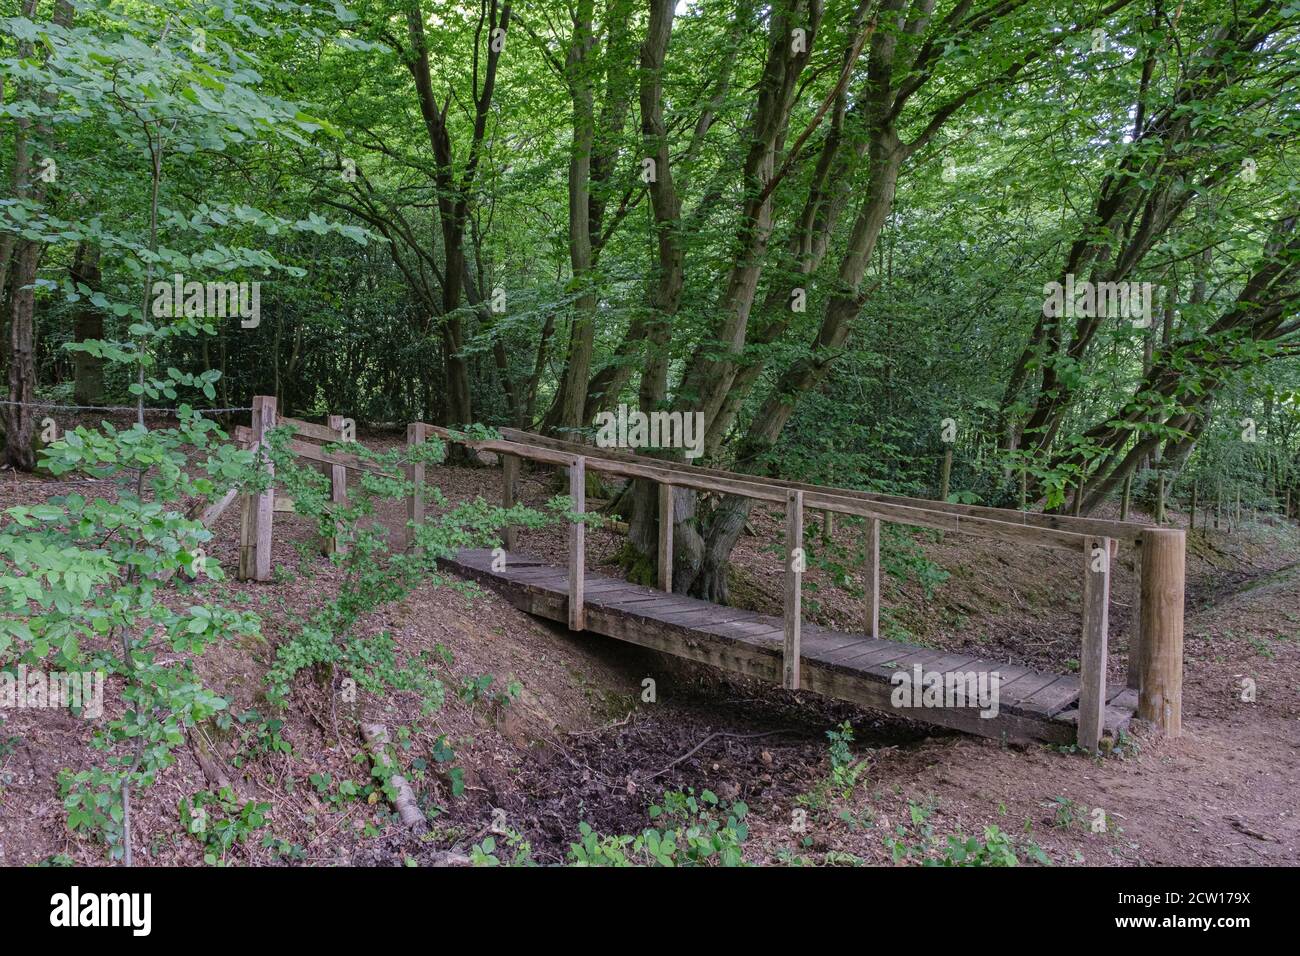 A rustic wooden bridge crosses a dry stream bed in the middle of the woods with trees & foliage. Ruislip Woods Nature Preserve, Hillingdon, London. Stock Photo